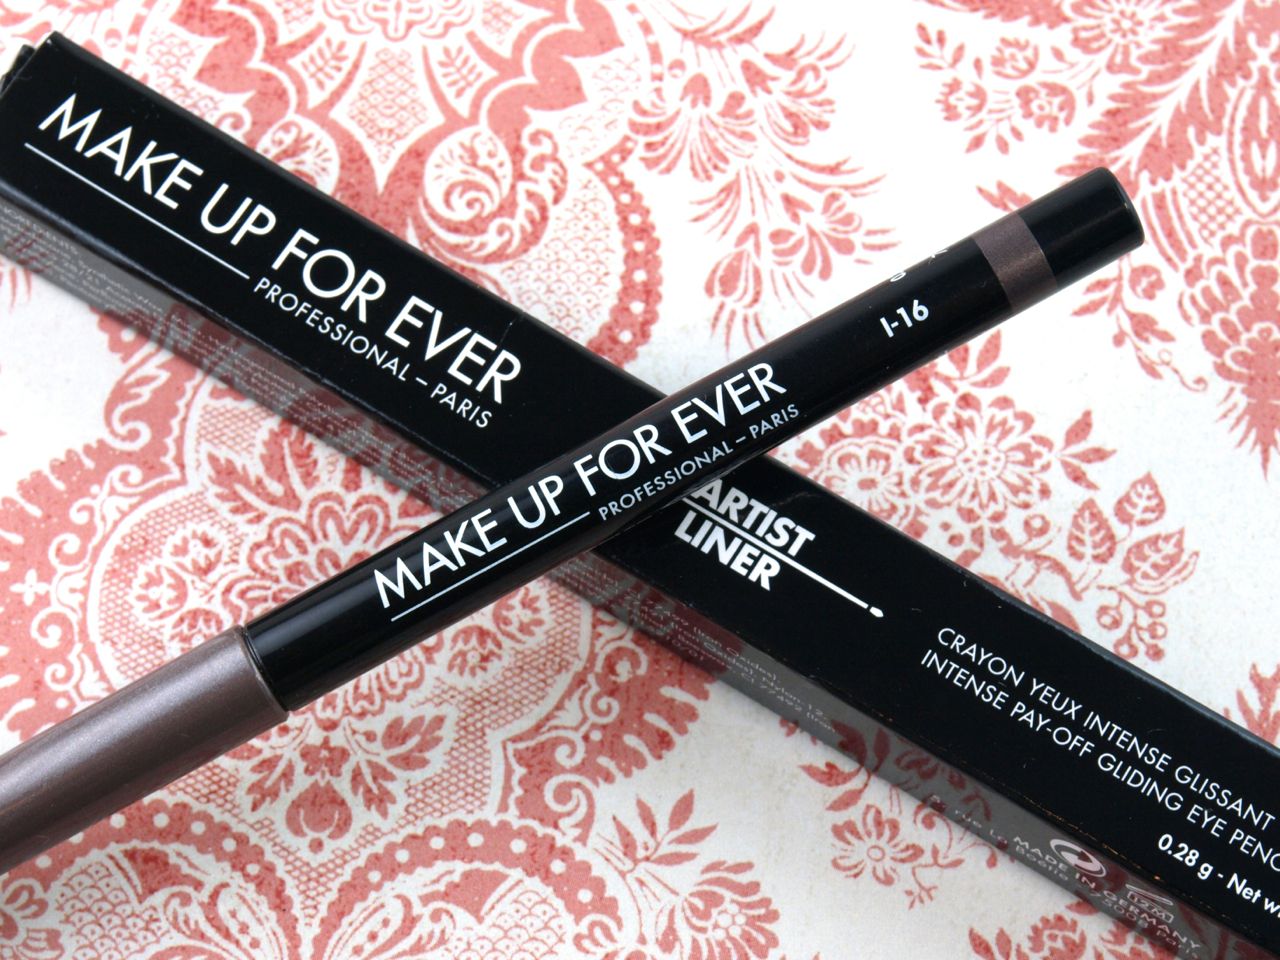 Make Up For Ever Artist Liner in "I-16": Review and Swatches